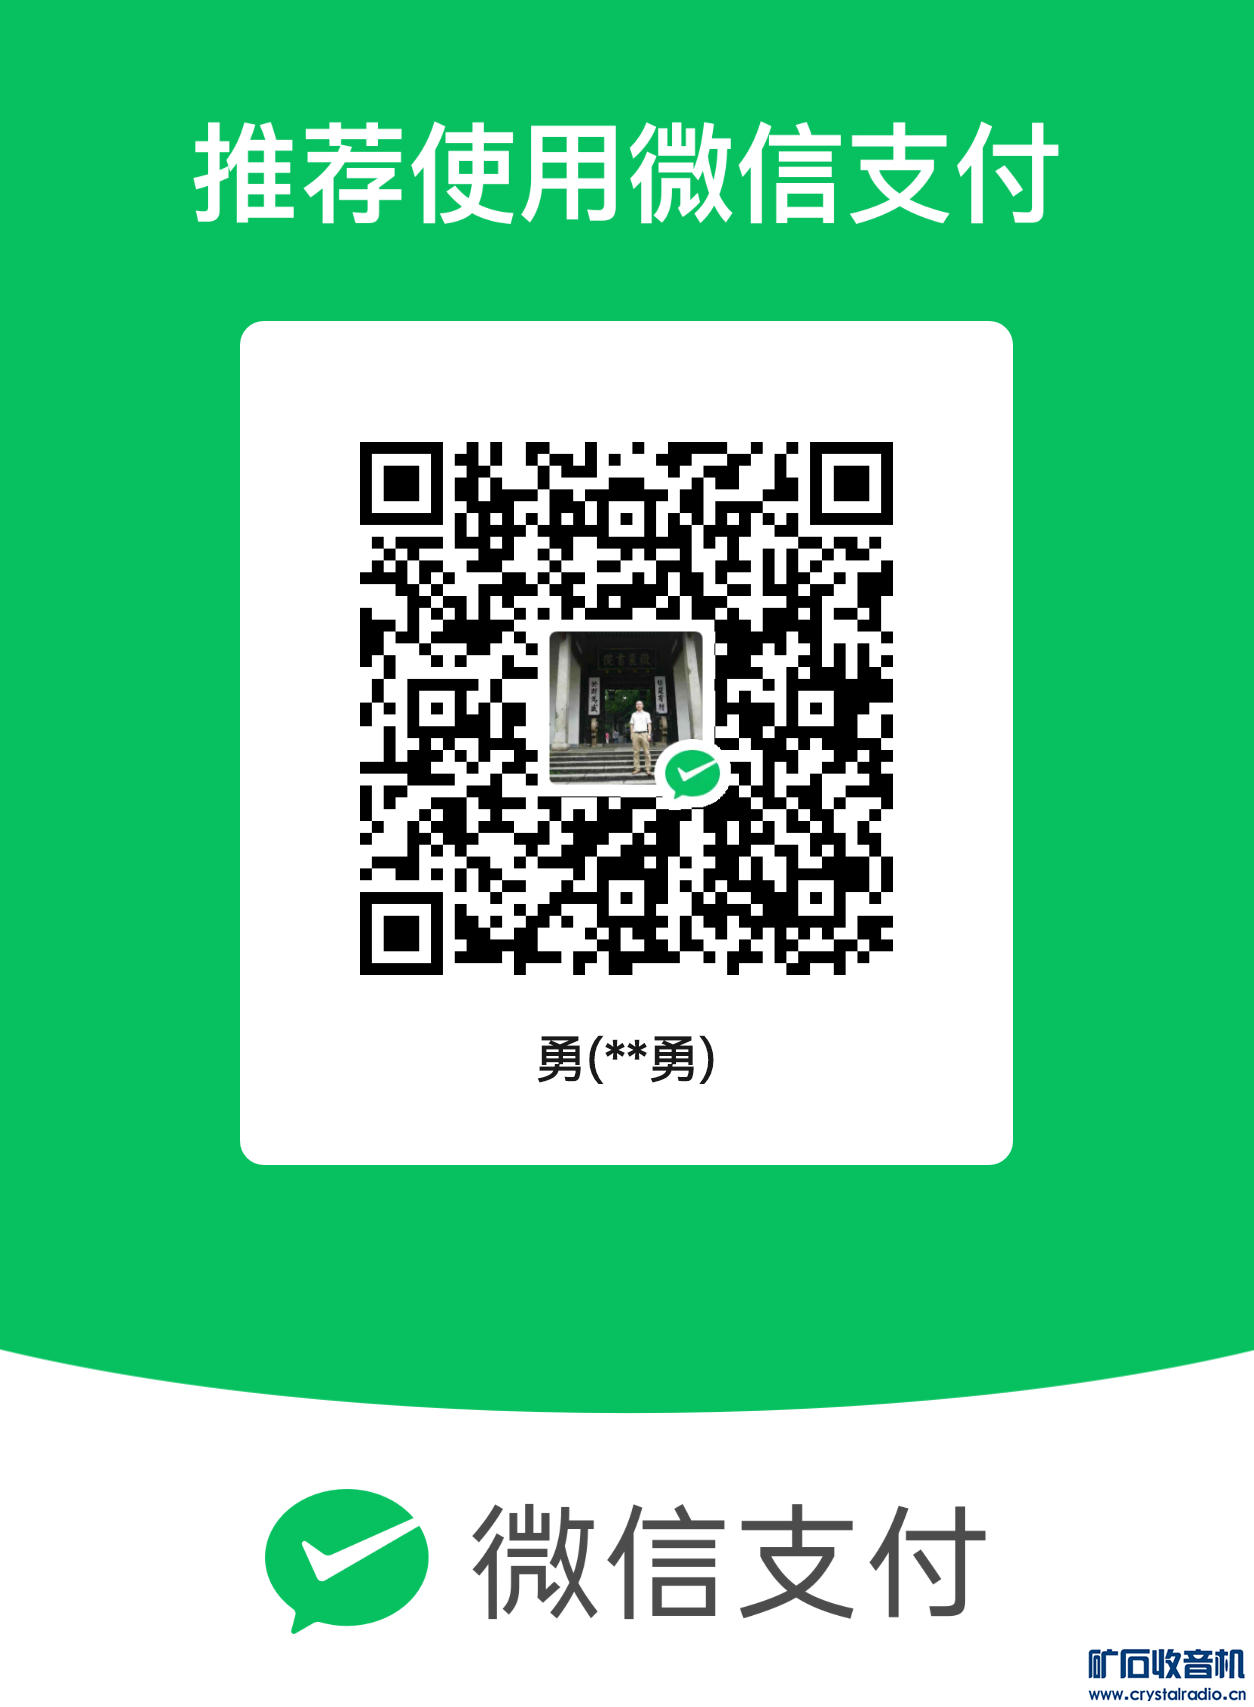 mm_facetoface_collect_qrcode_1701485992926.png